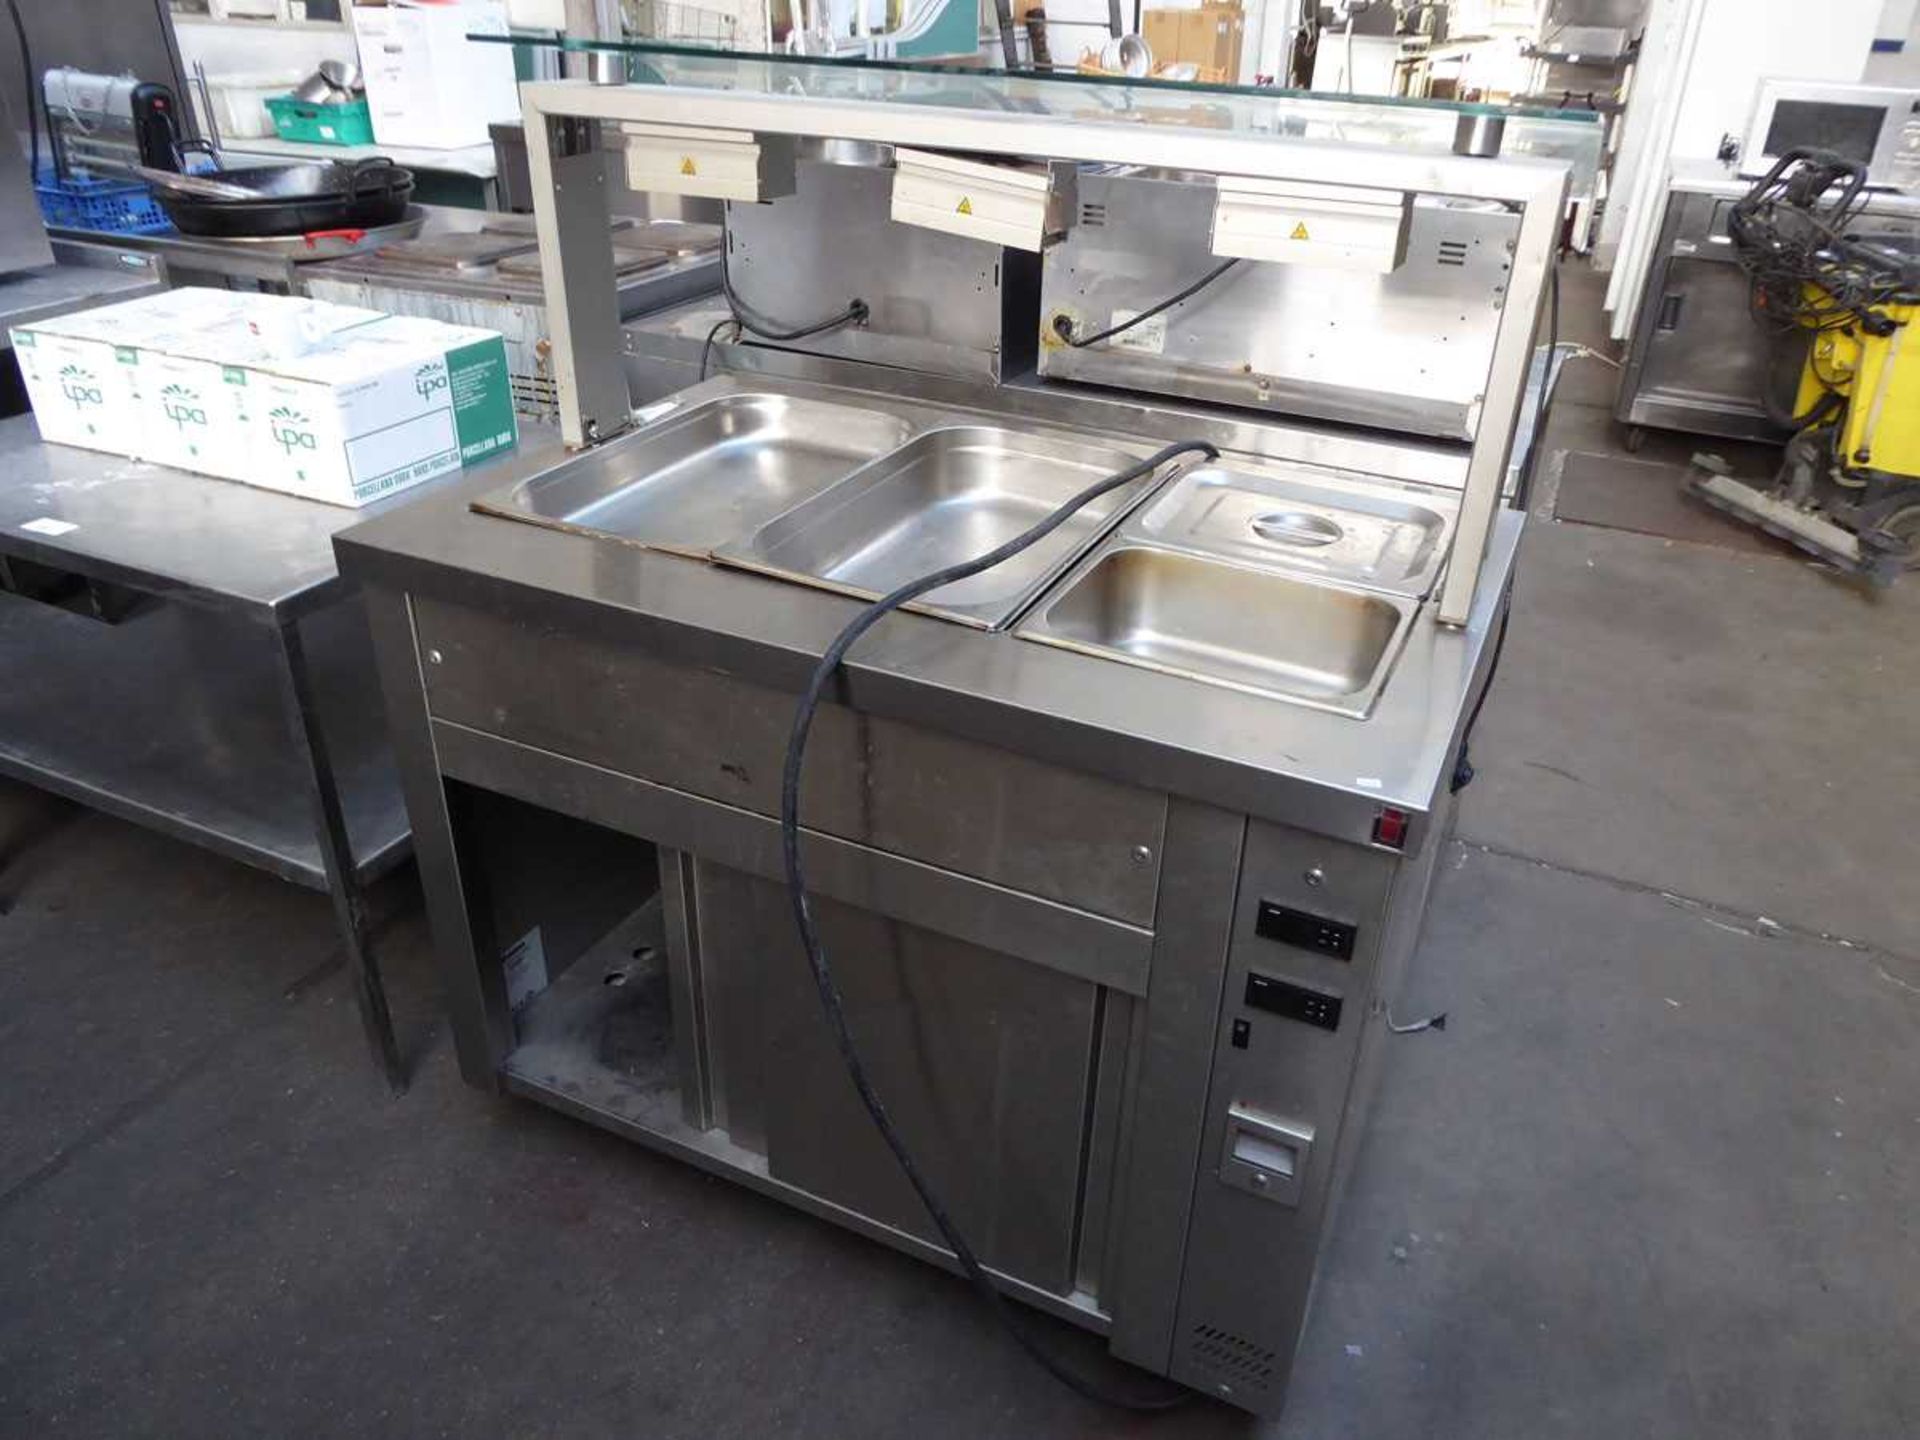 +VAT 110cm Inomak heated servery with bain-marie top and sliding cupboard under